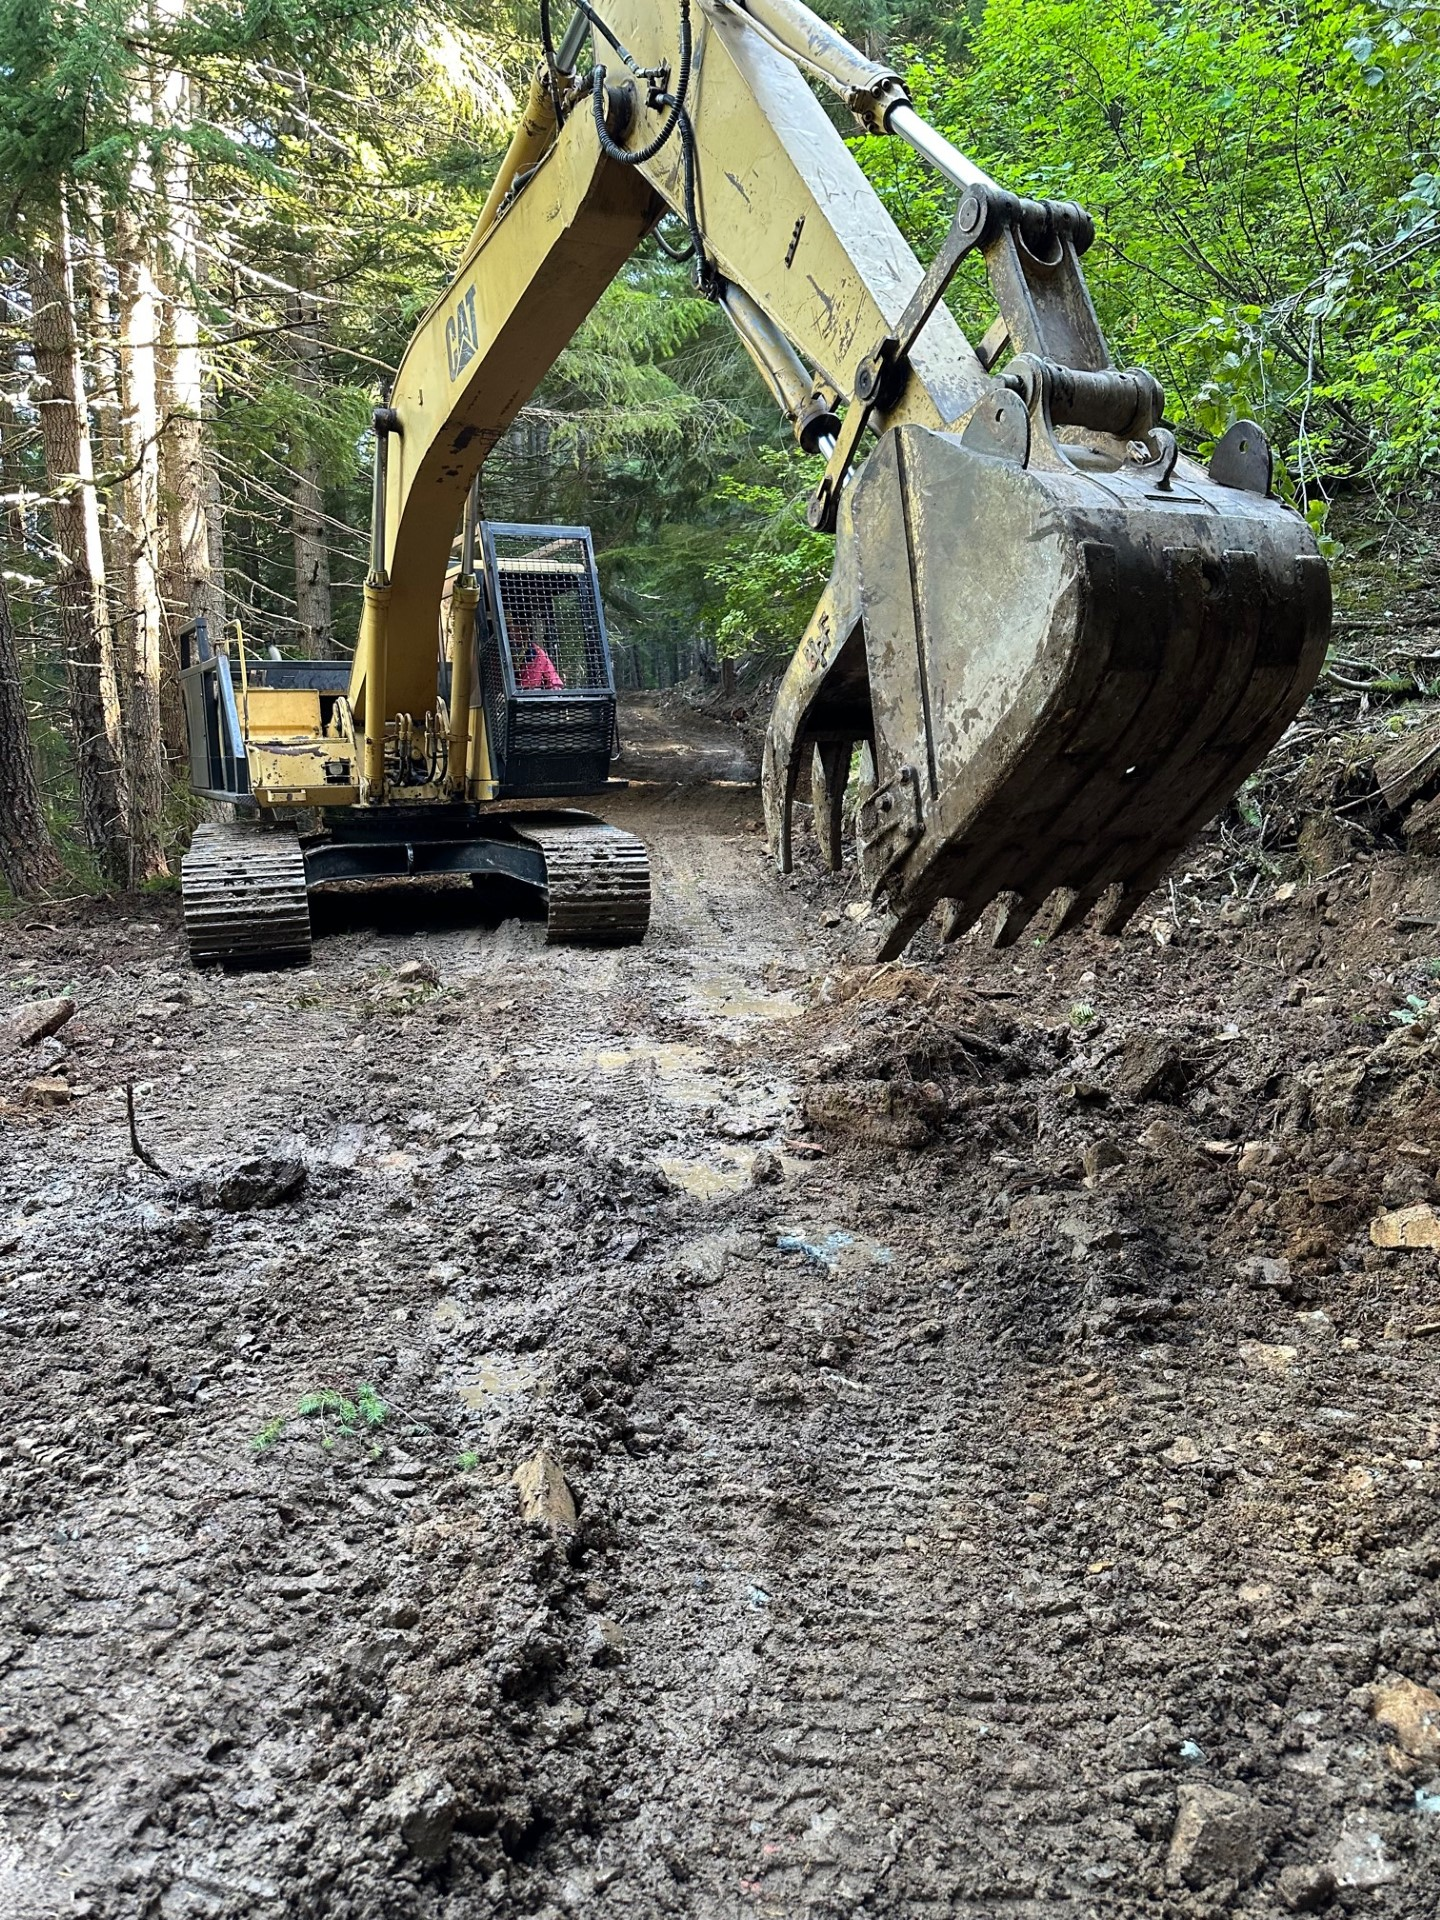 Excavator moves material along a dirt road